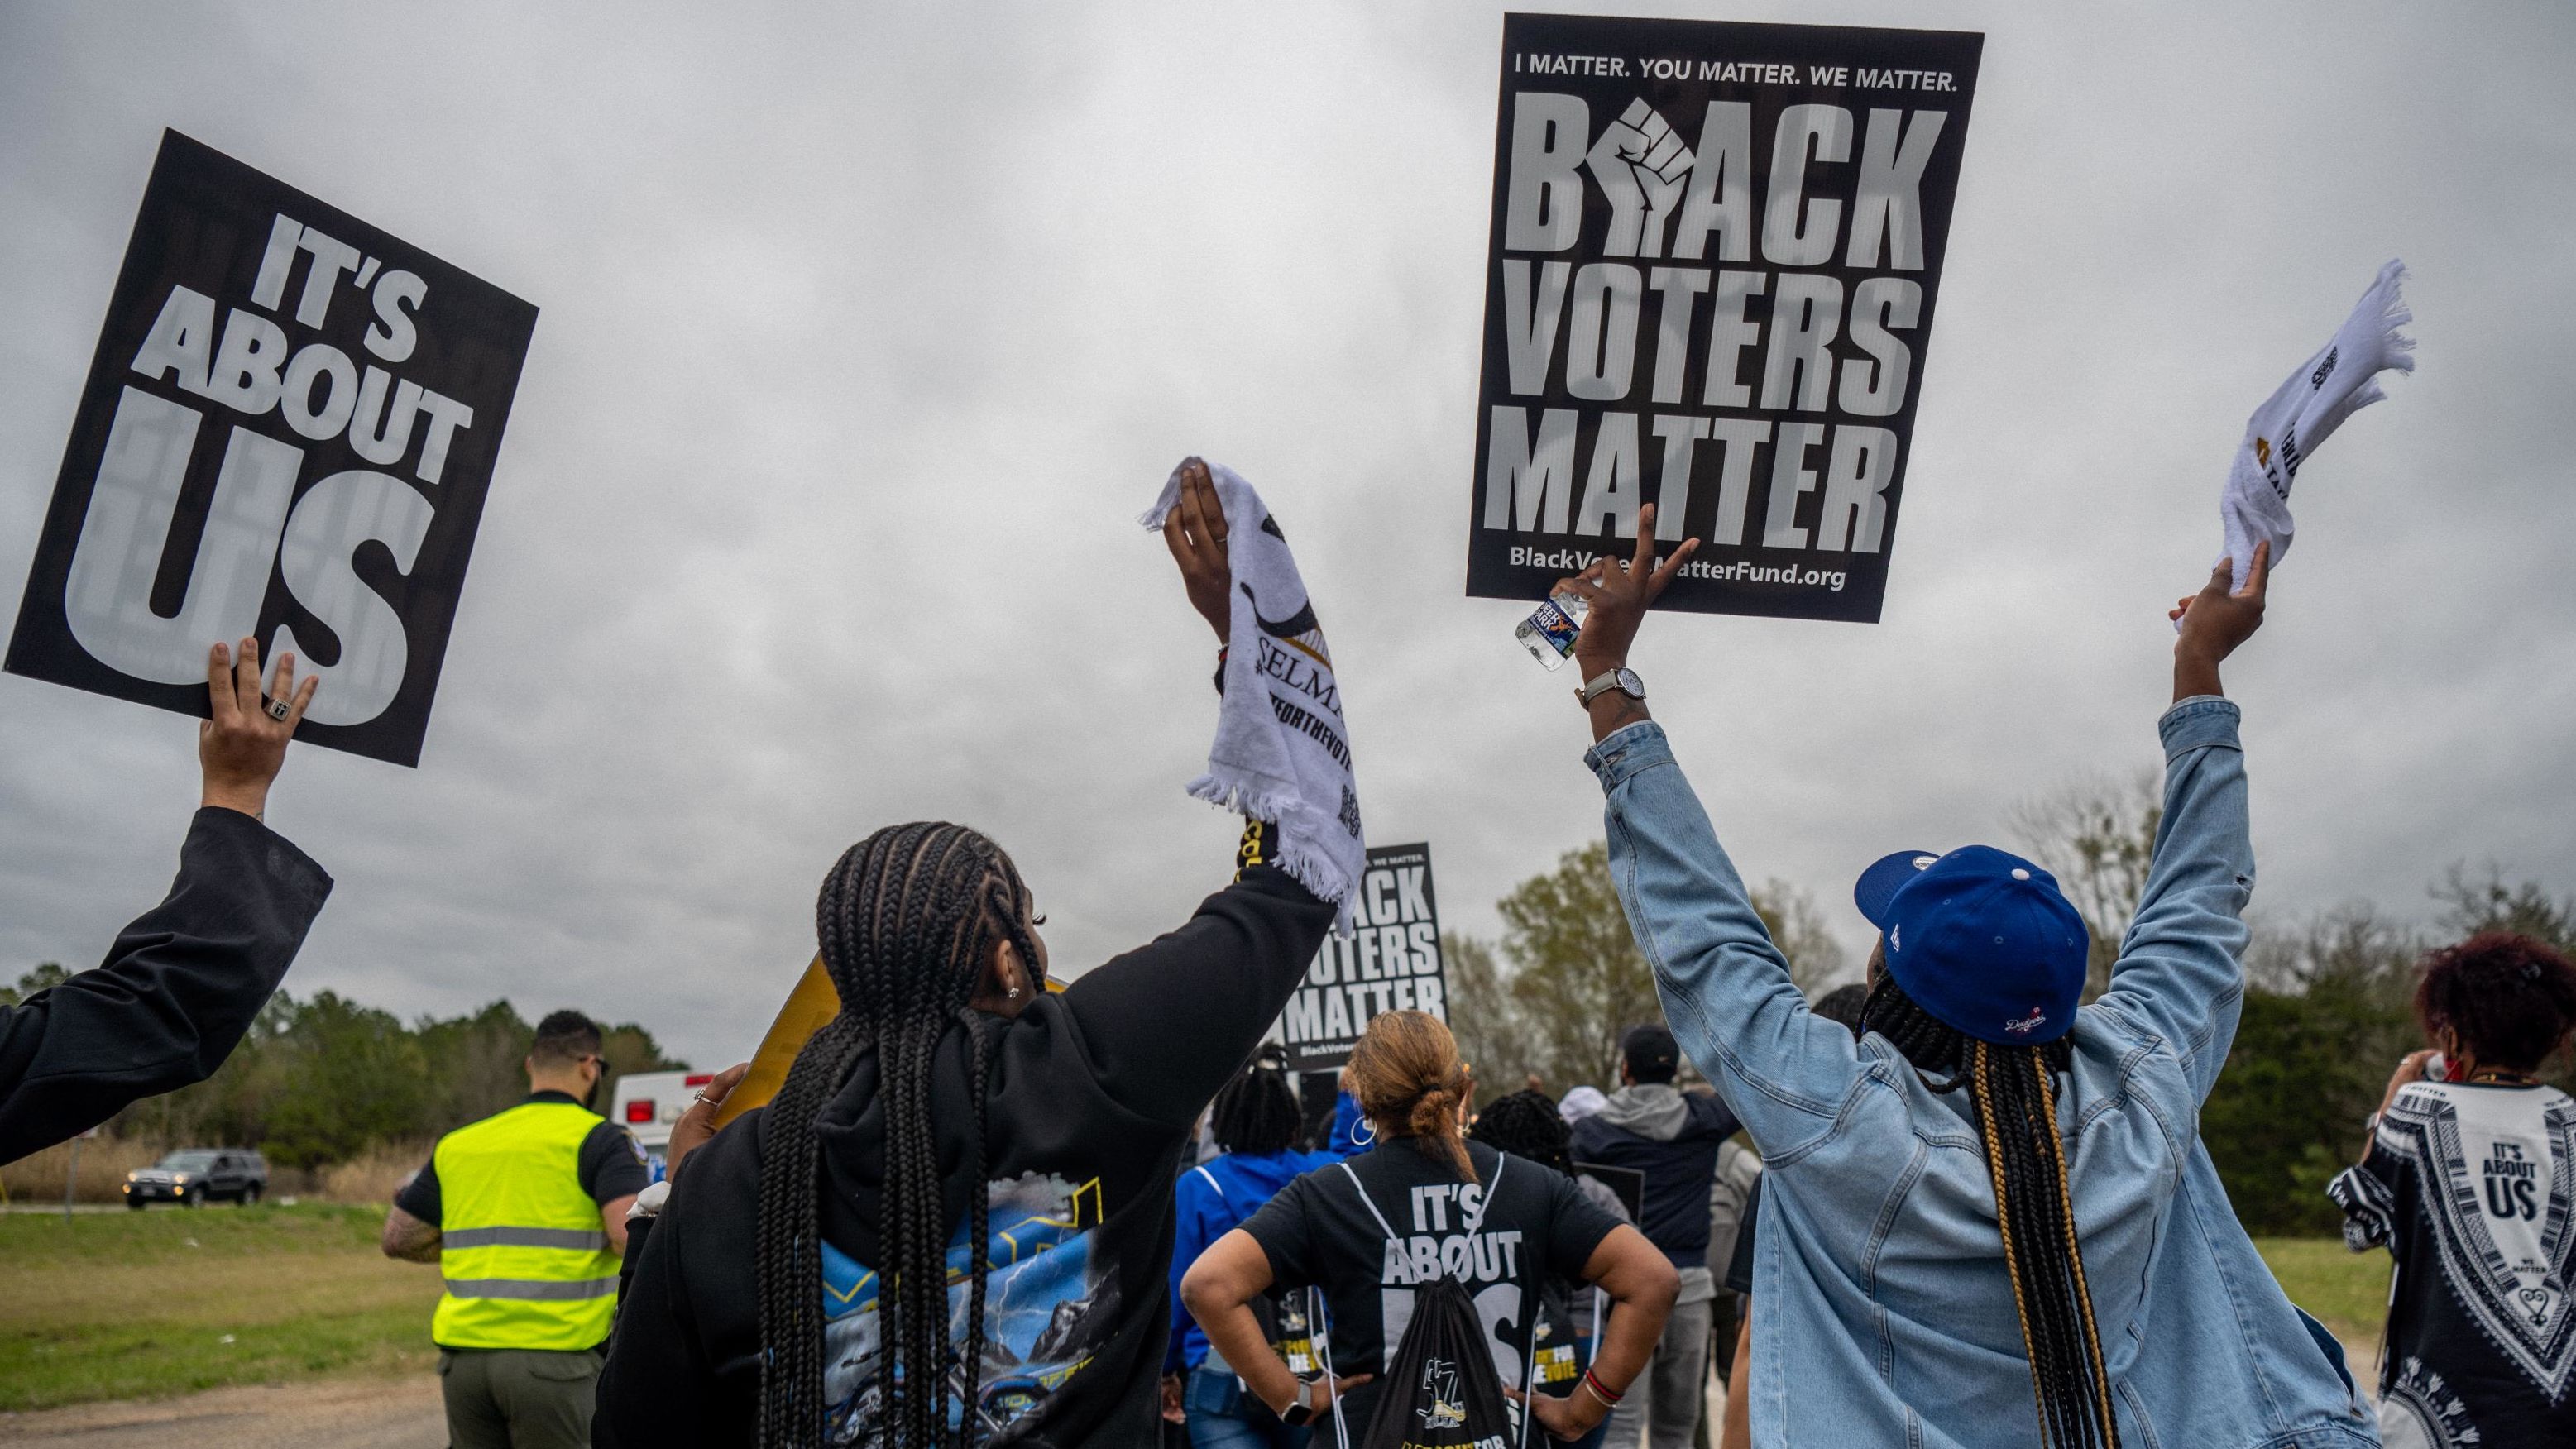 Participants demonstrate in Selma, Alabama, on March 9, 2022, during a march to mark the 57th anniversary of the 1965 Selma to Montgomery march.